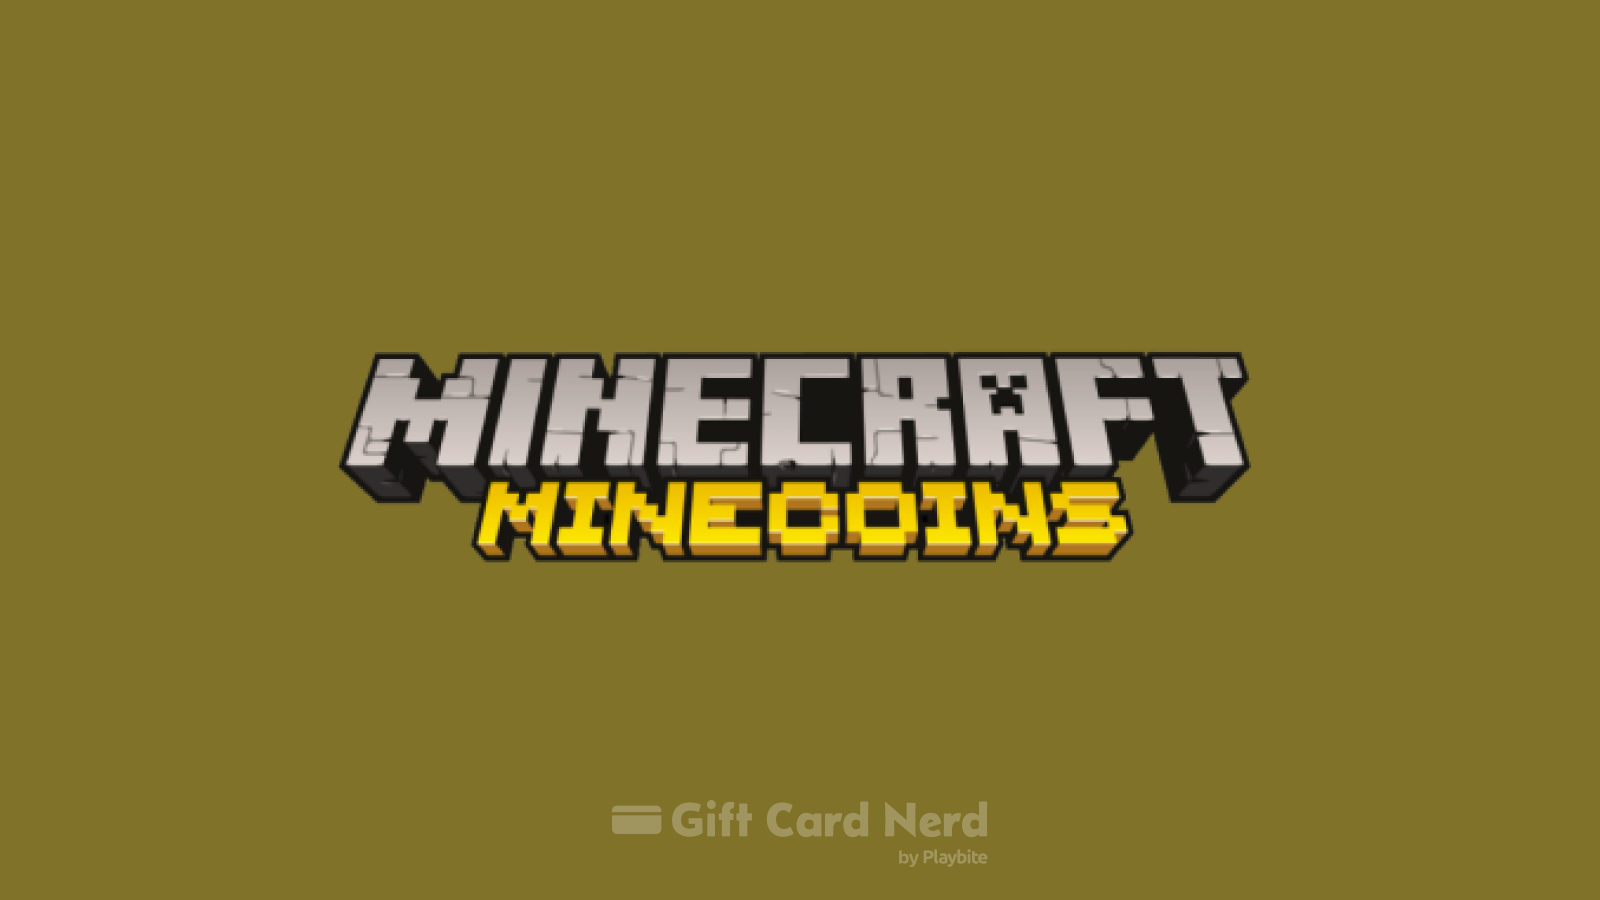 Can You Buy Minecraft Gift Cards at GameStop?